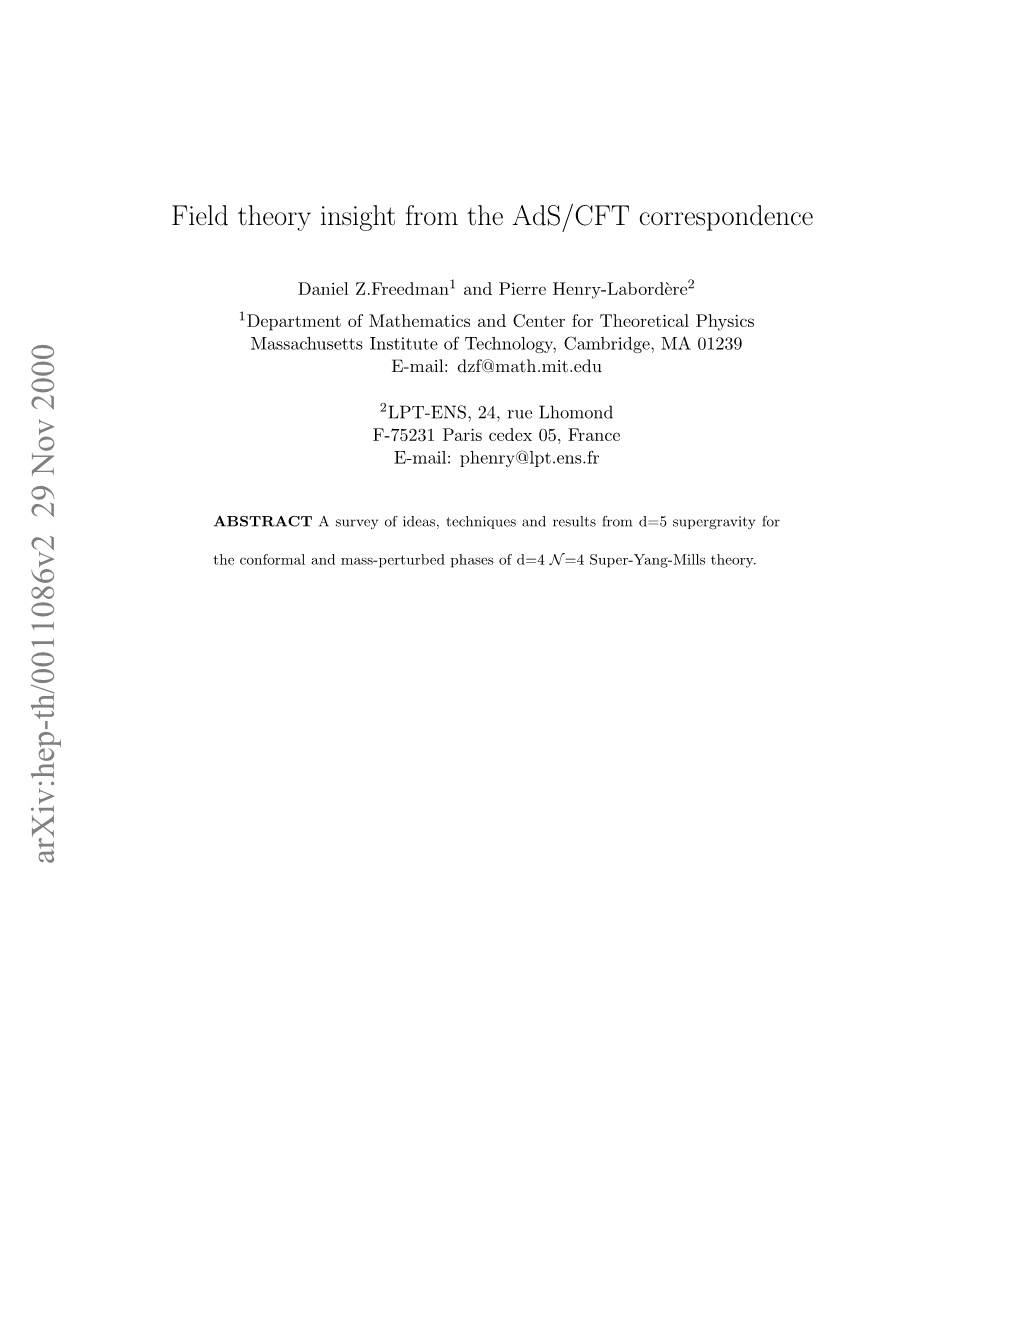 Field Theory Insight from the Ads/CFT Correspondence